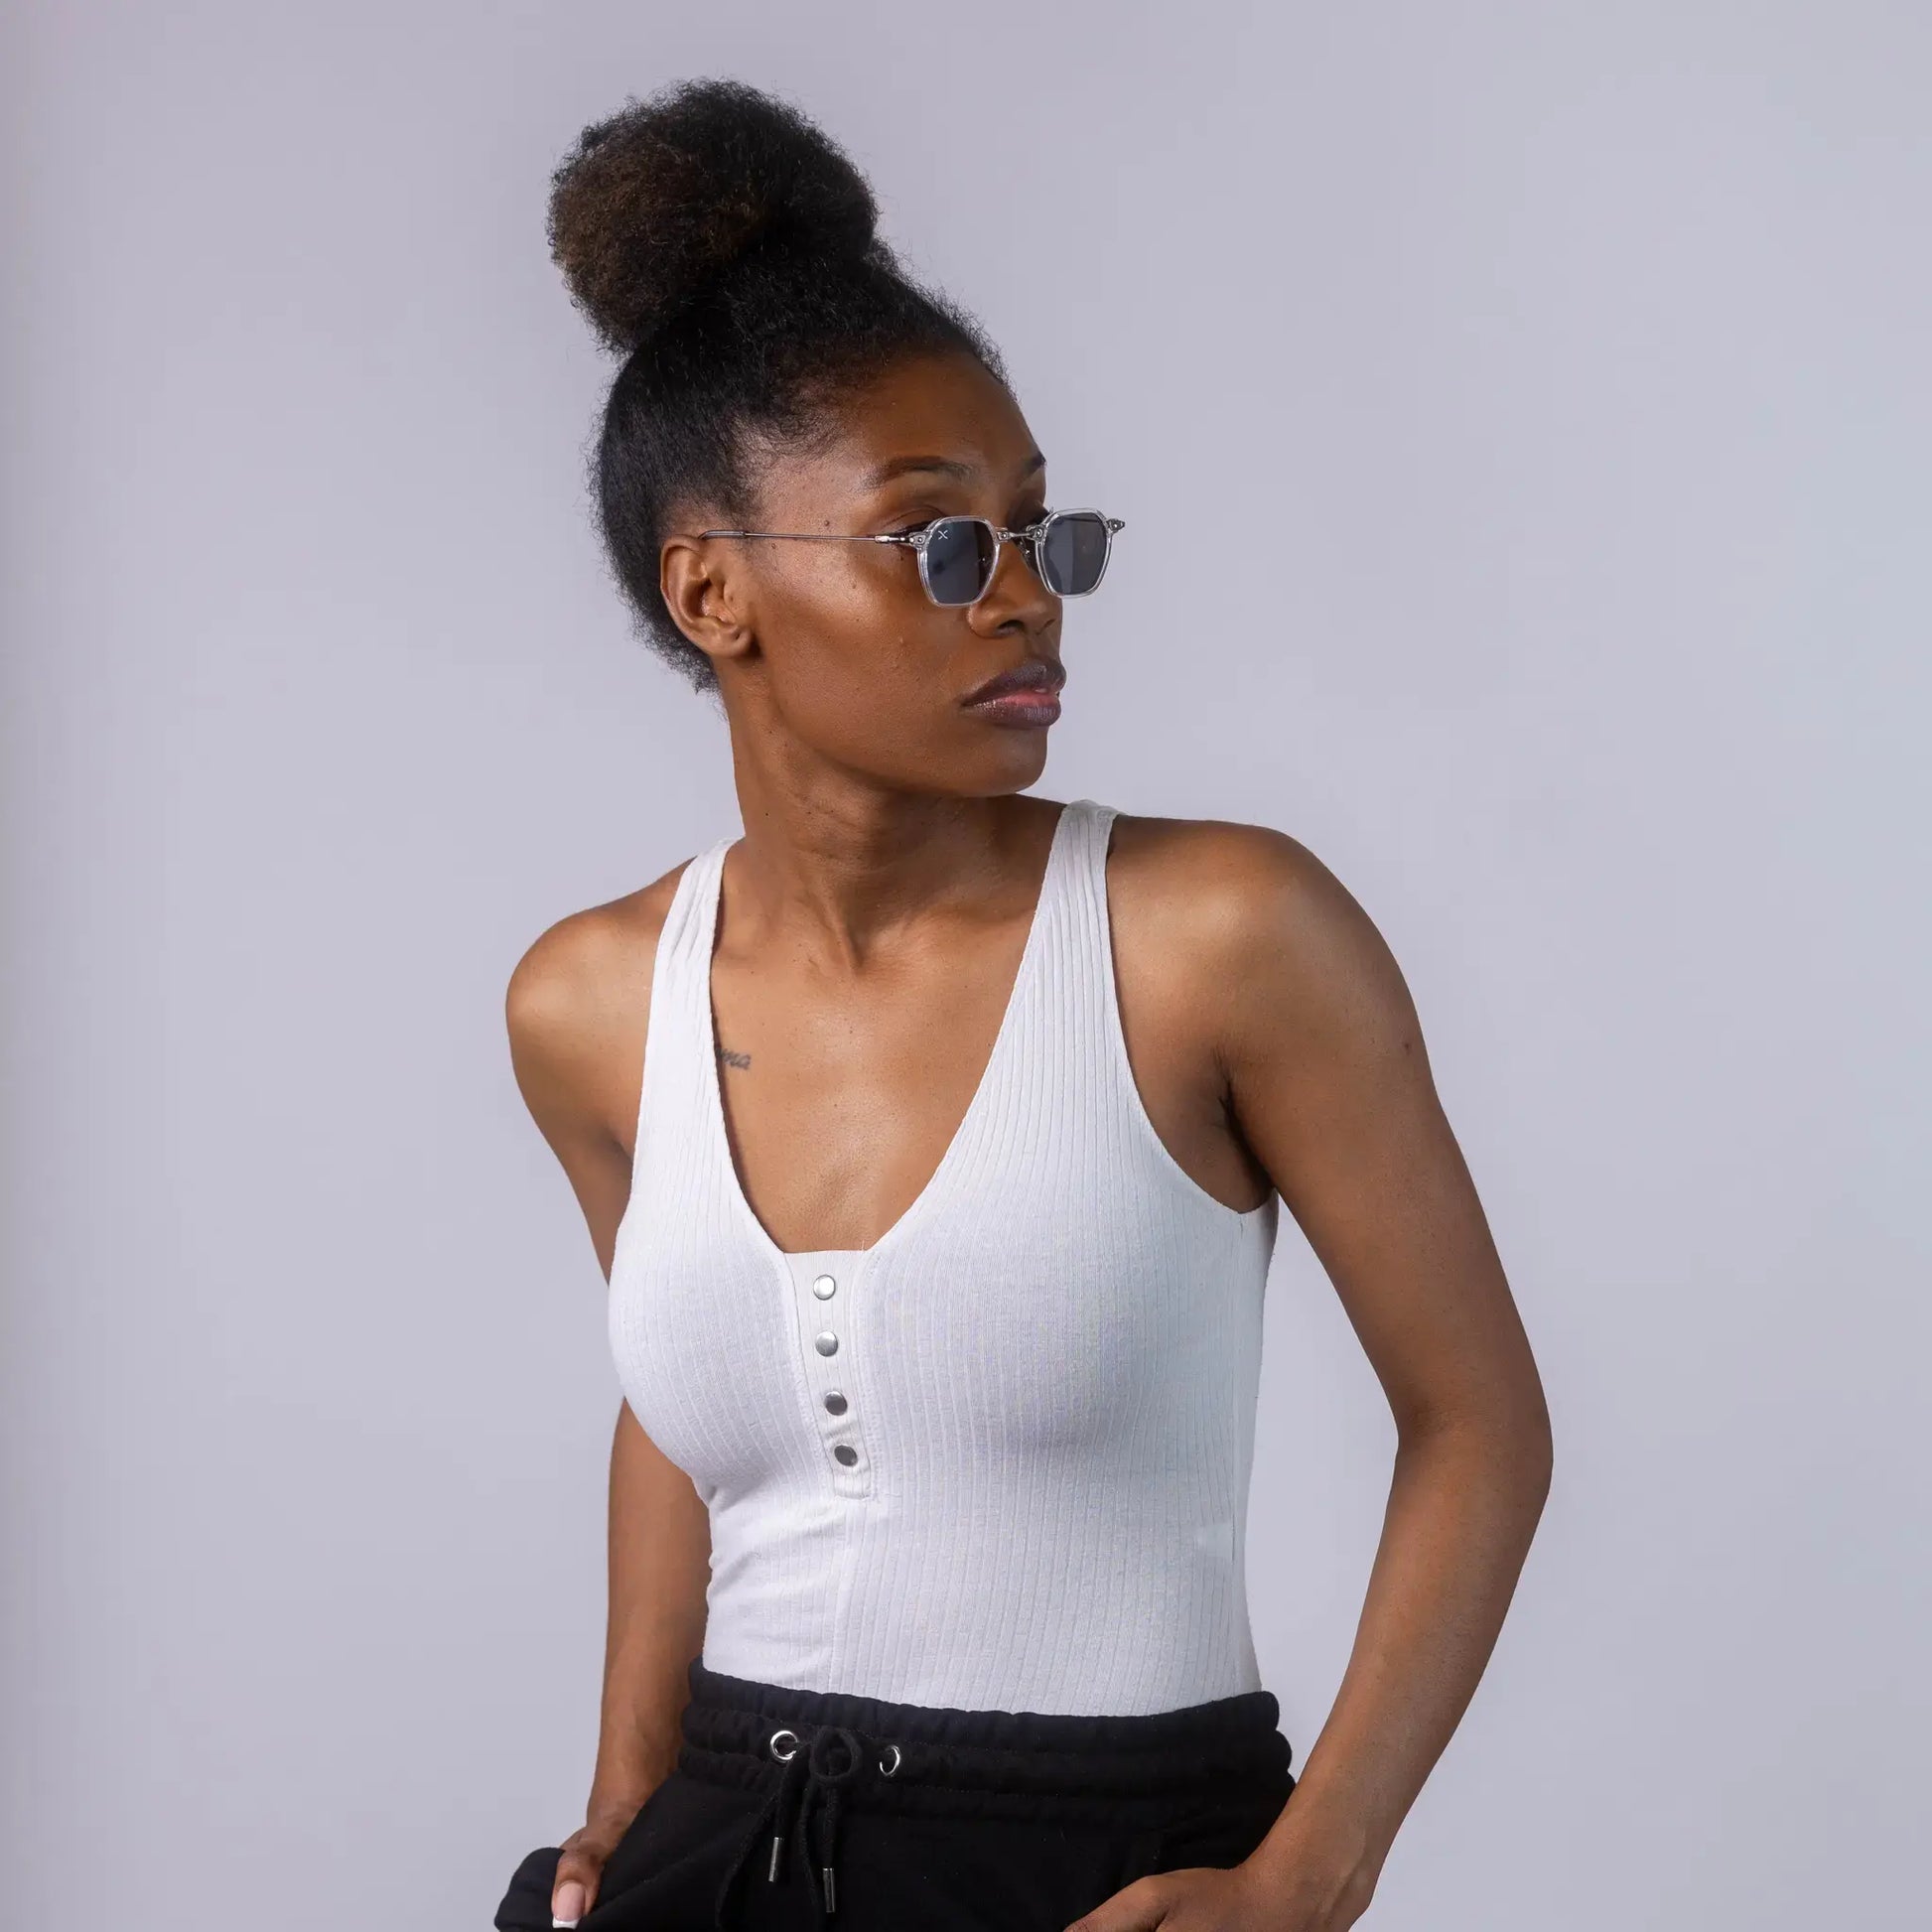 A female model wearing Exposure Sunglasses polarized sunglasses with white frames and black lenses, posing against a white background.